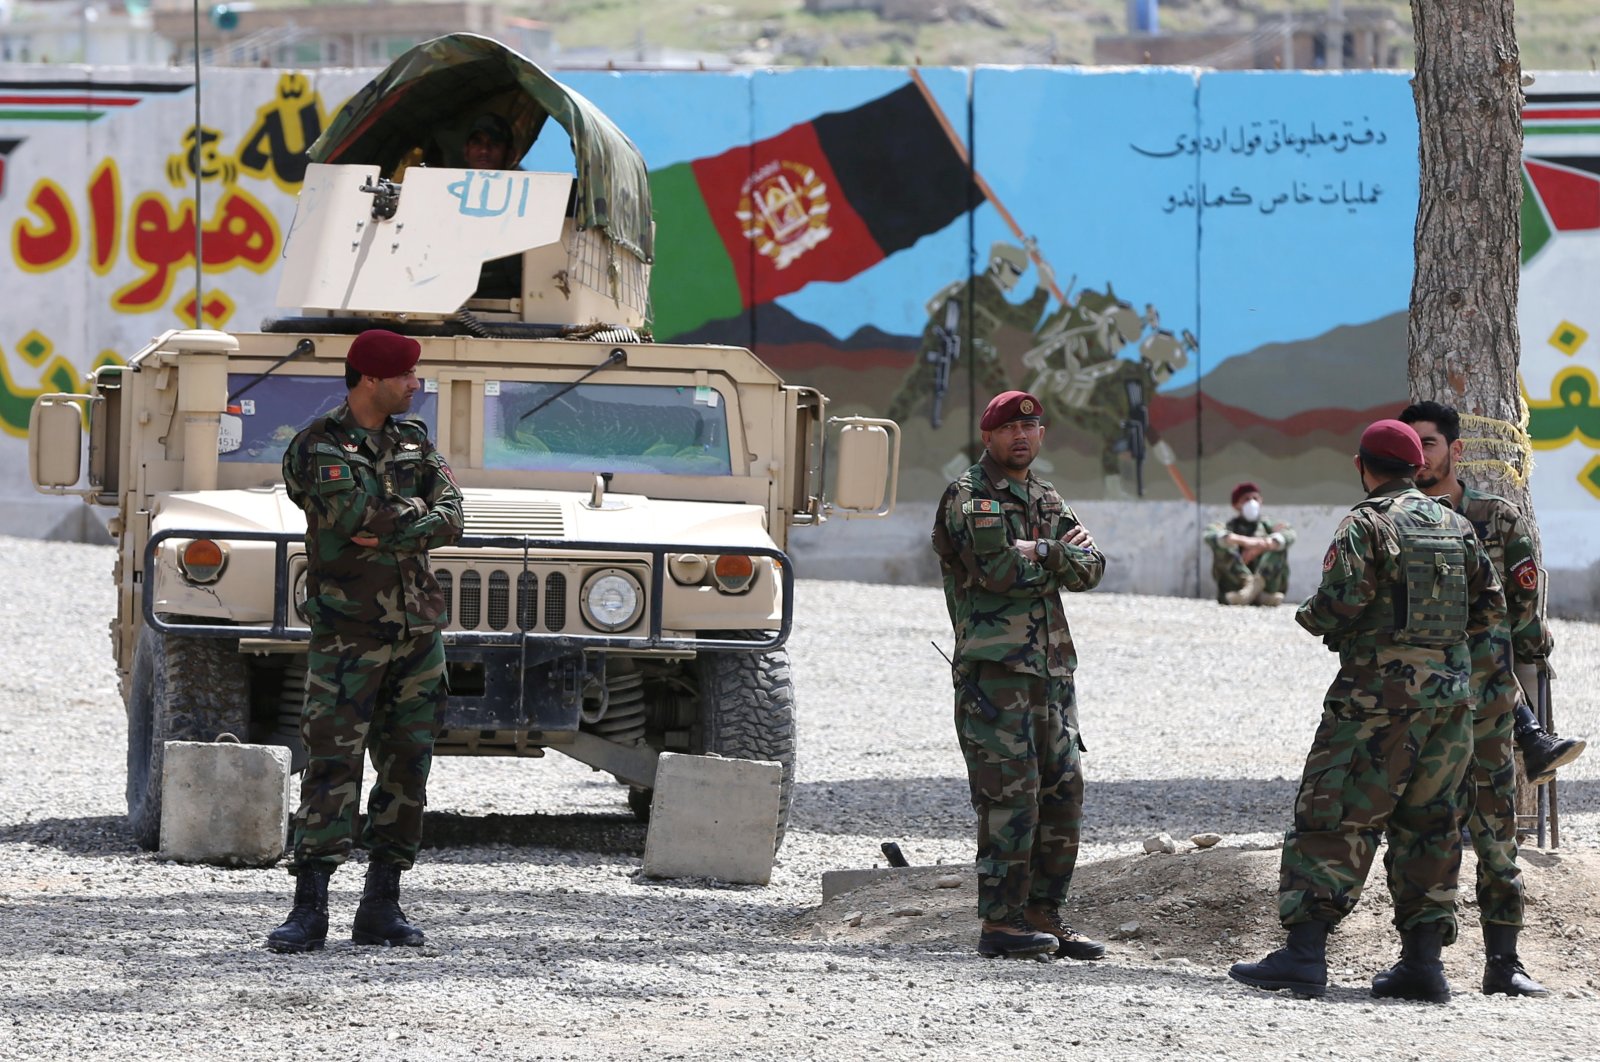 Afghan National Army soldiers keep watch at the site of a suicide attack, Kabul, Afghanistan, April 29. (REUTERS Photo)